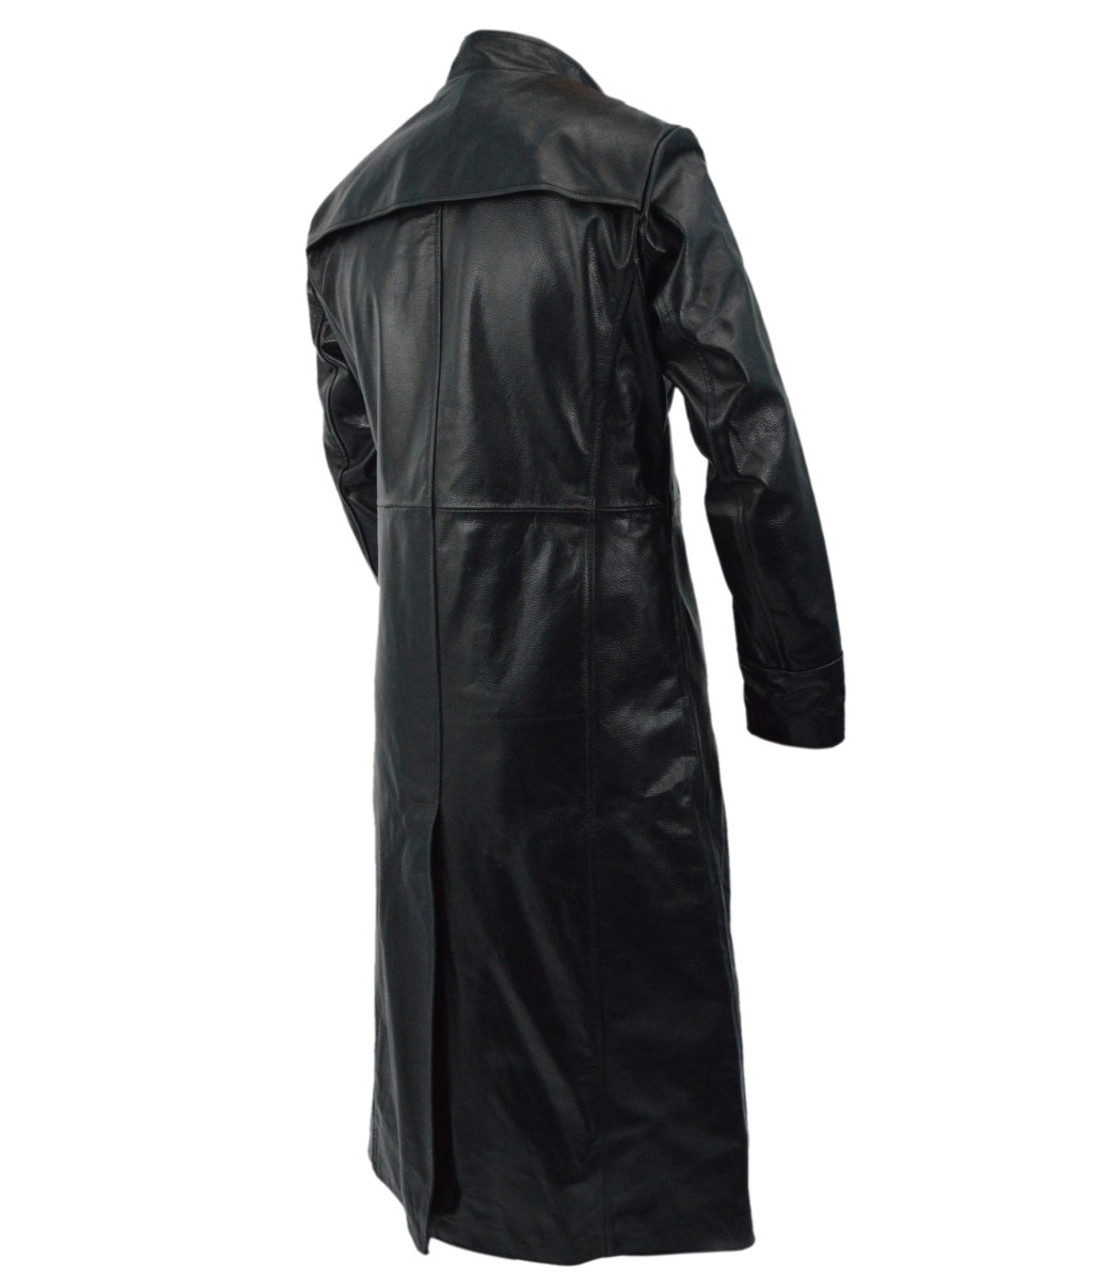 Neo Matrix Keanu Reeves Black Leather Trench Coat | Feather Skin